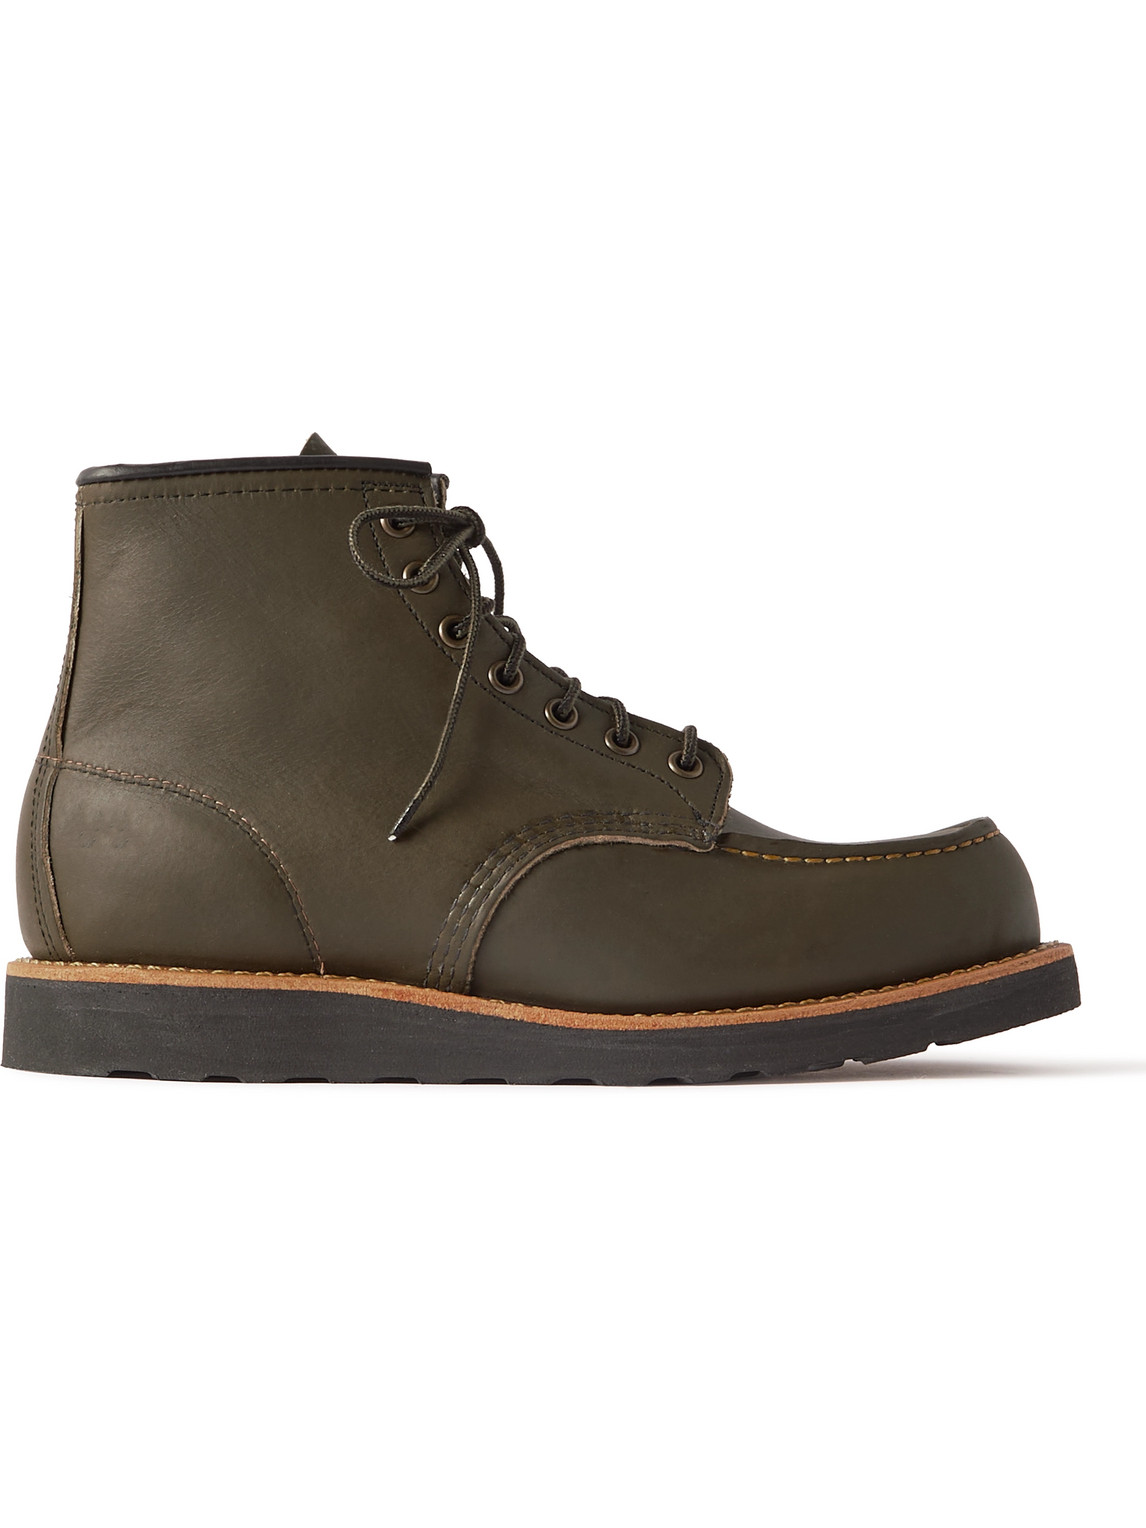 8849 6-Inch Classic Moc Leather Boots